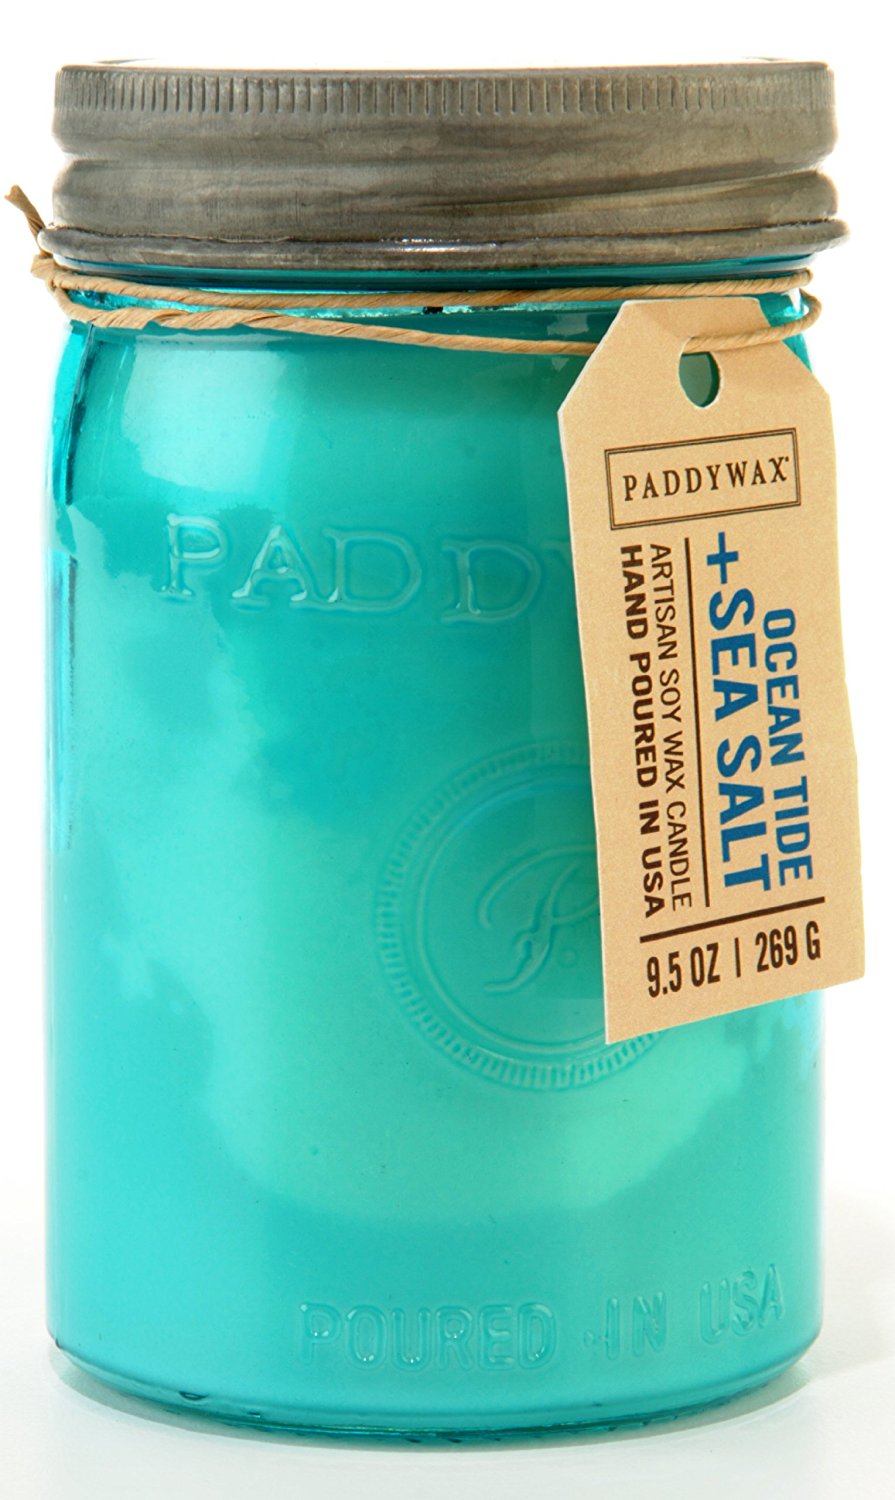 Paddywax Candles Relish Jar Collection Candle, 9.5-Ounce, Aqua Ocean Tide and Sea Salt